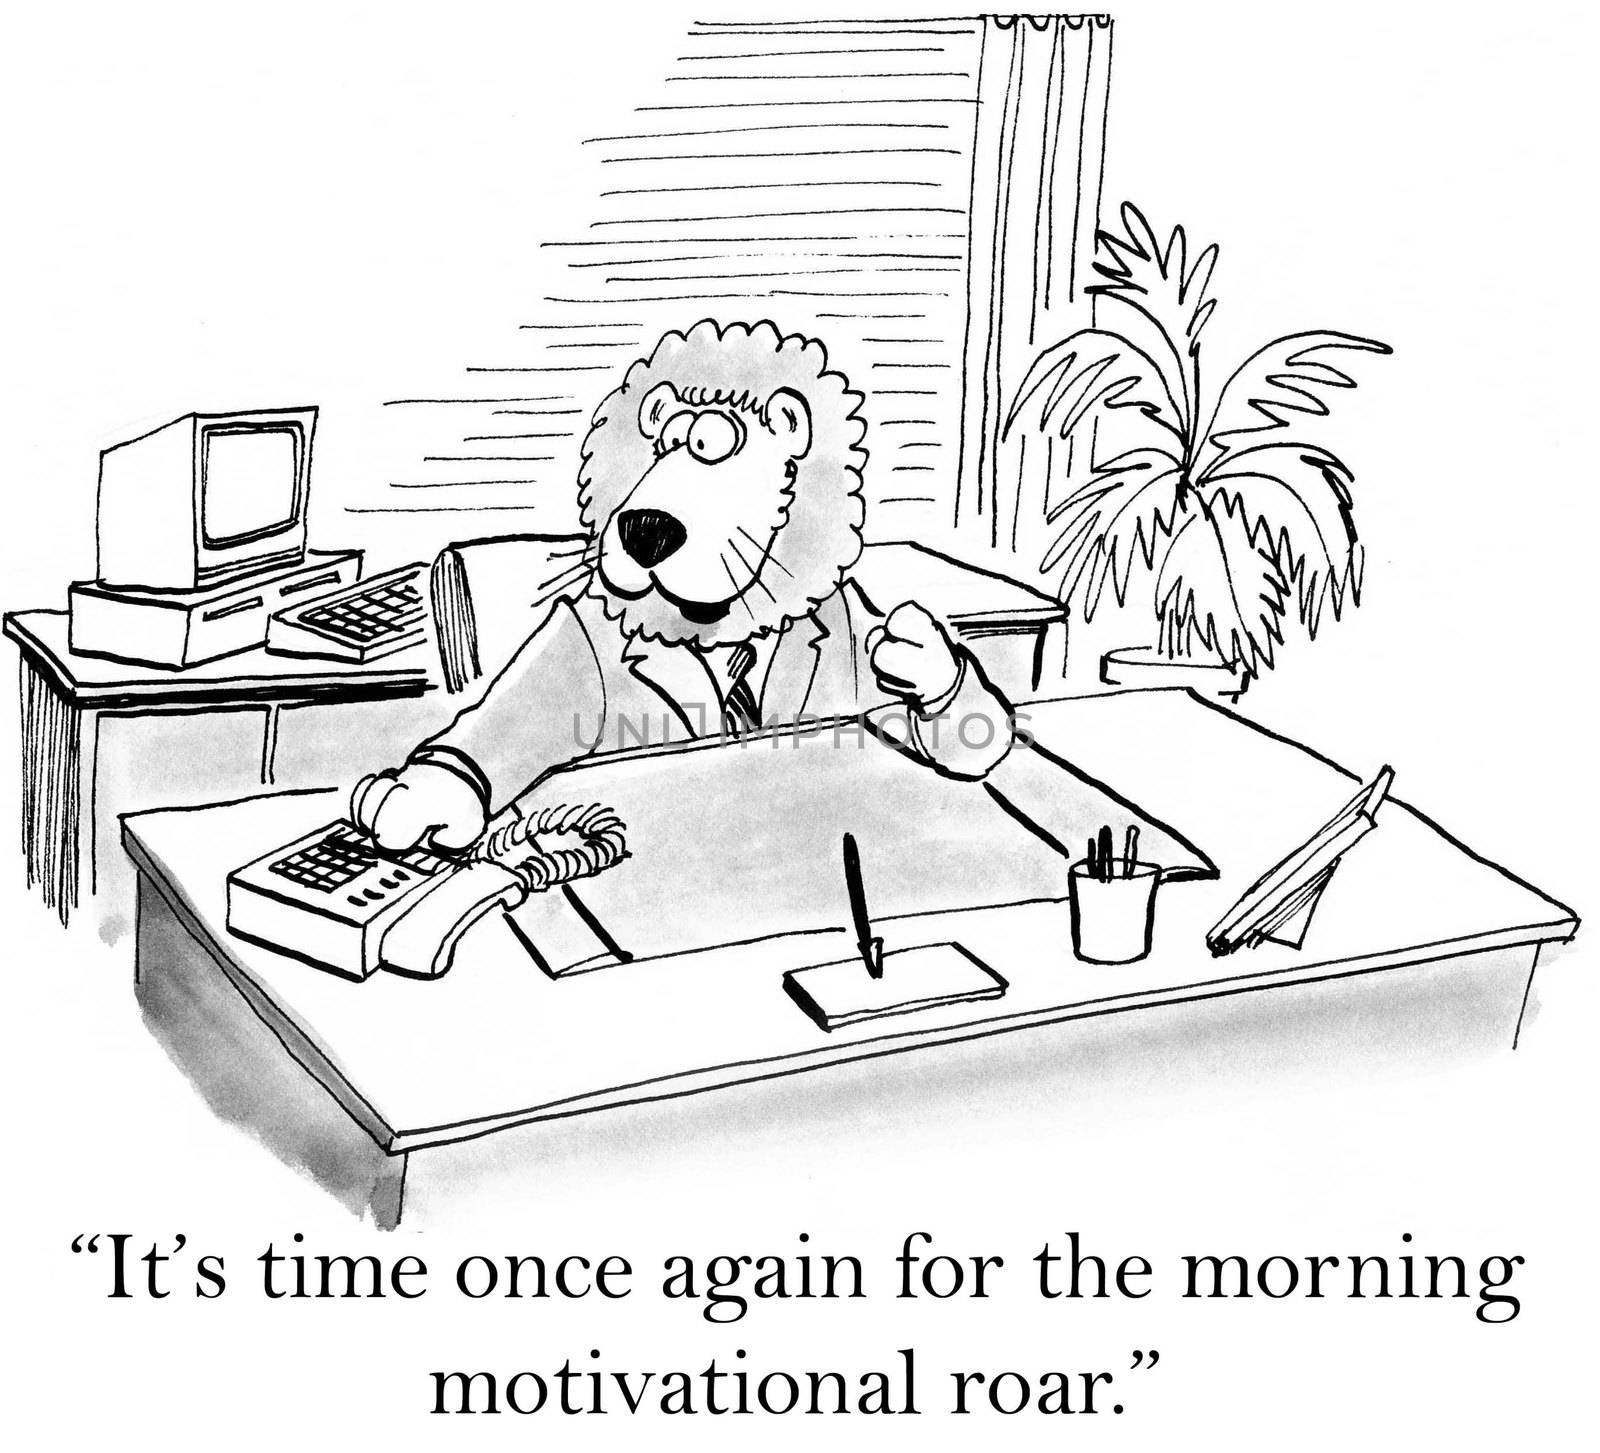 "It's time once gain for the morning motivational roar."